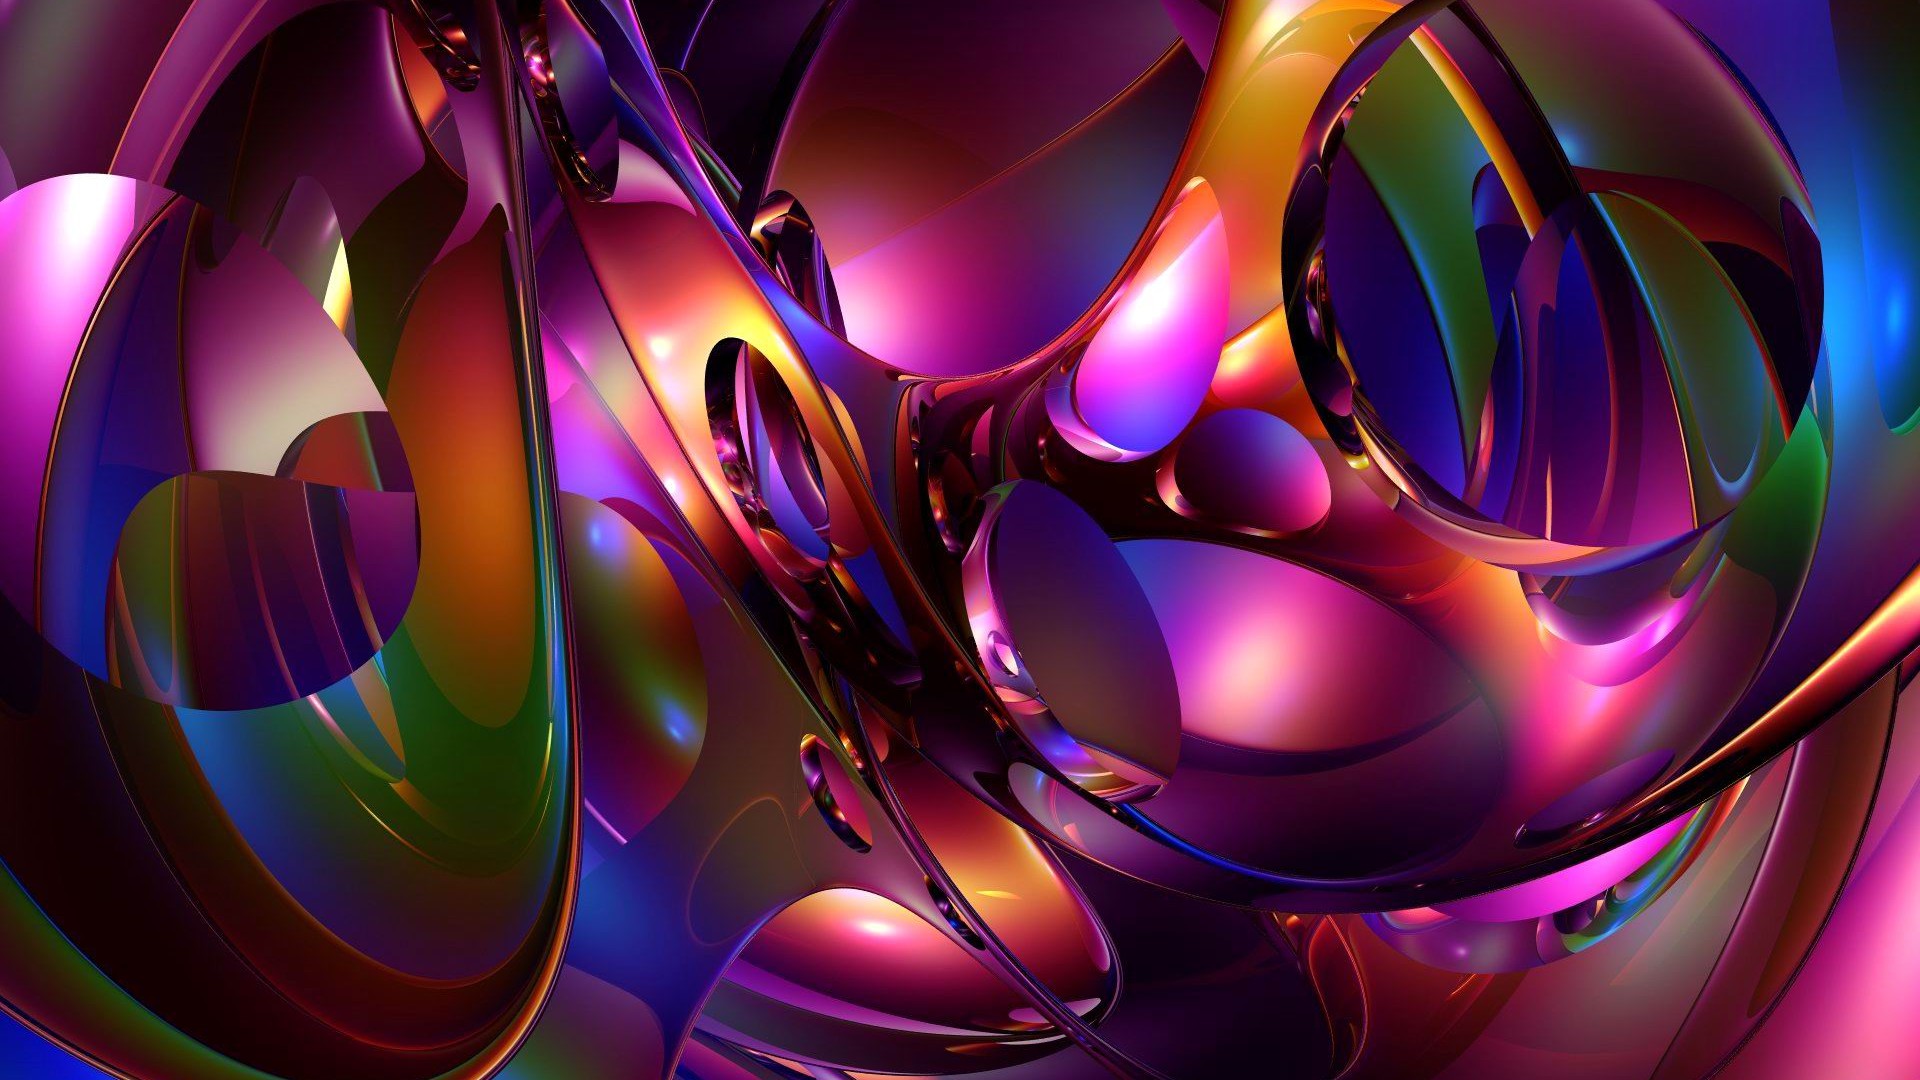 Free download Abstract Wallpaper Hd Free Download [1920x1080] for your